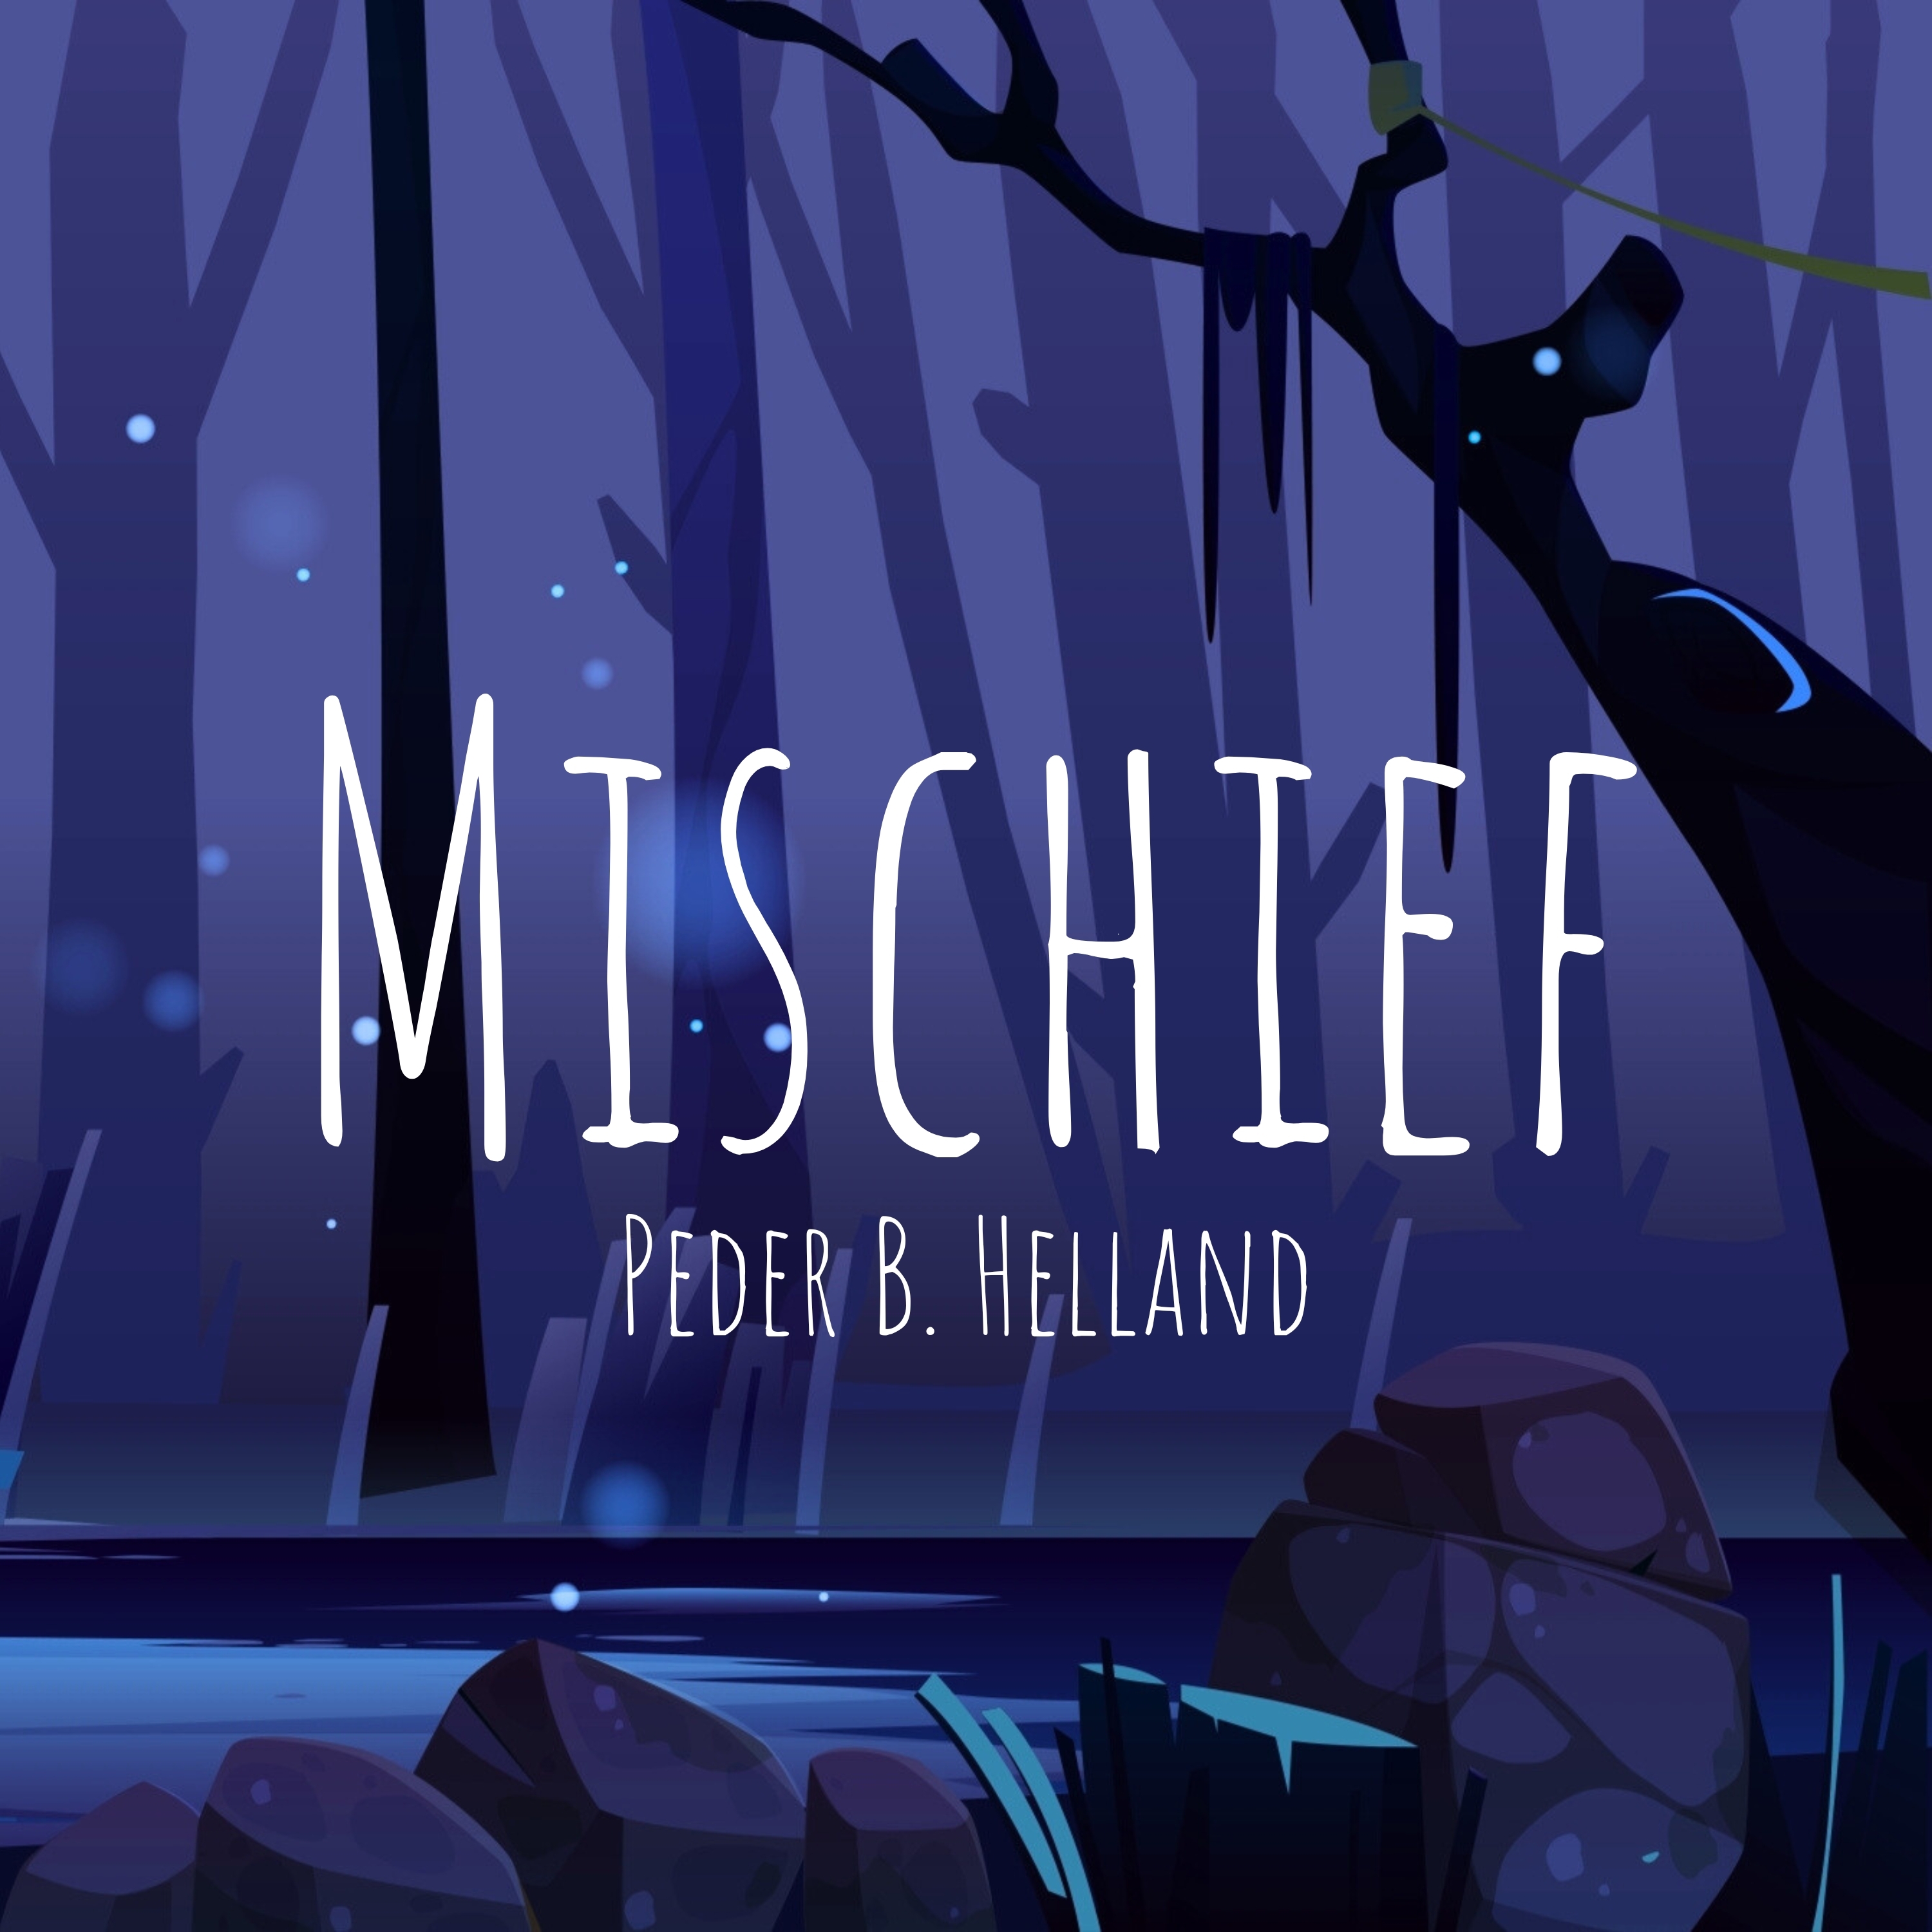 Cover art for the single Mischief by Peder B. Helland